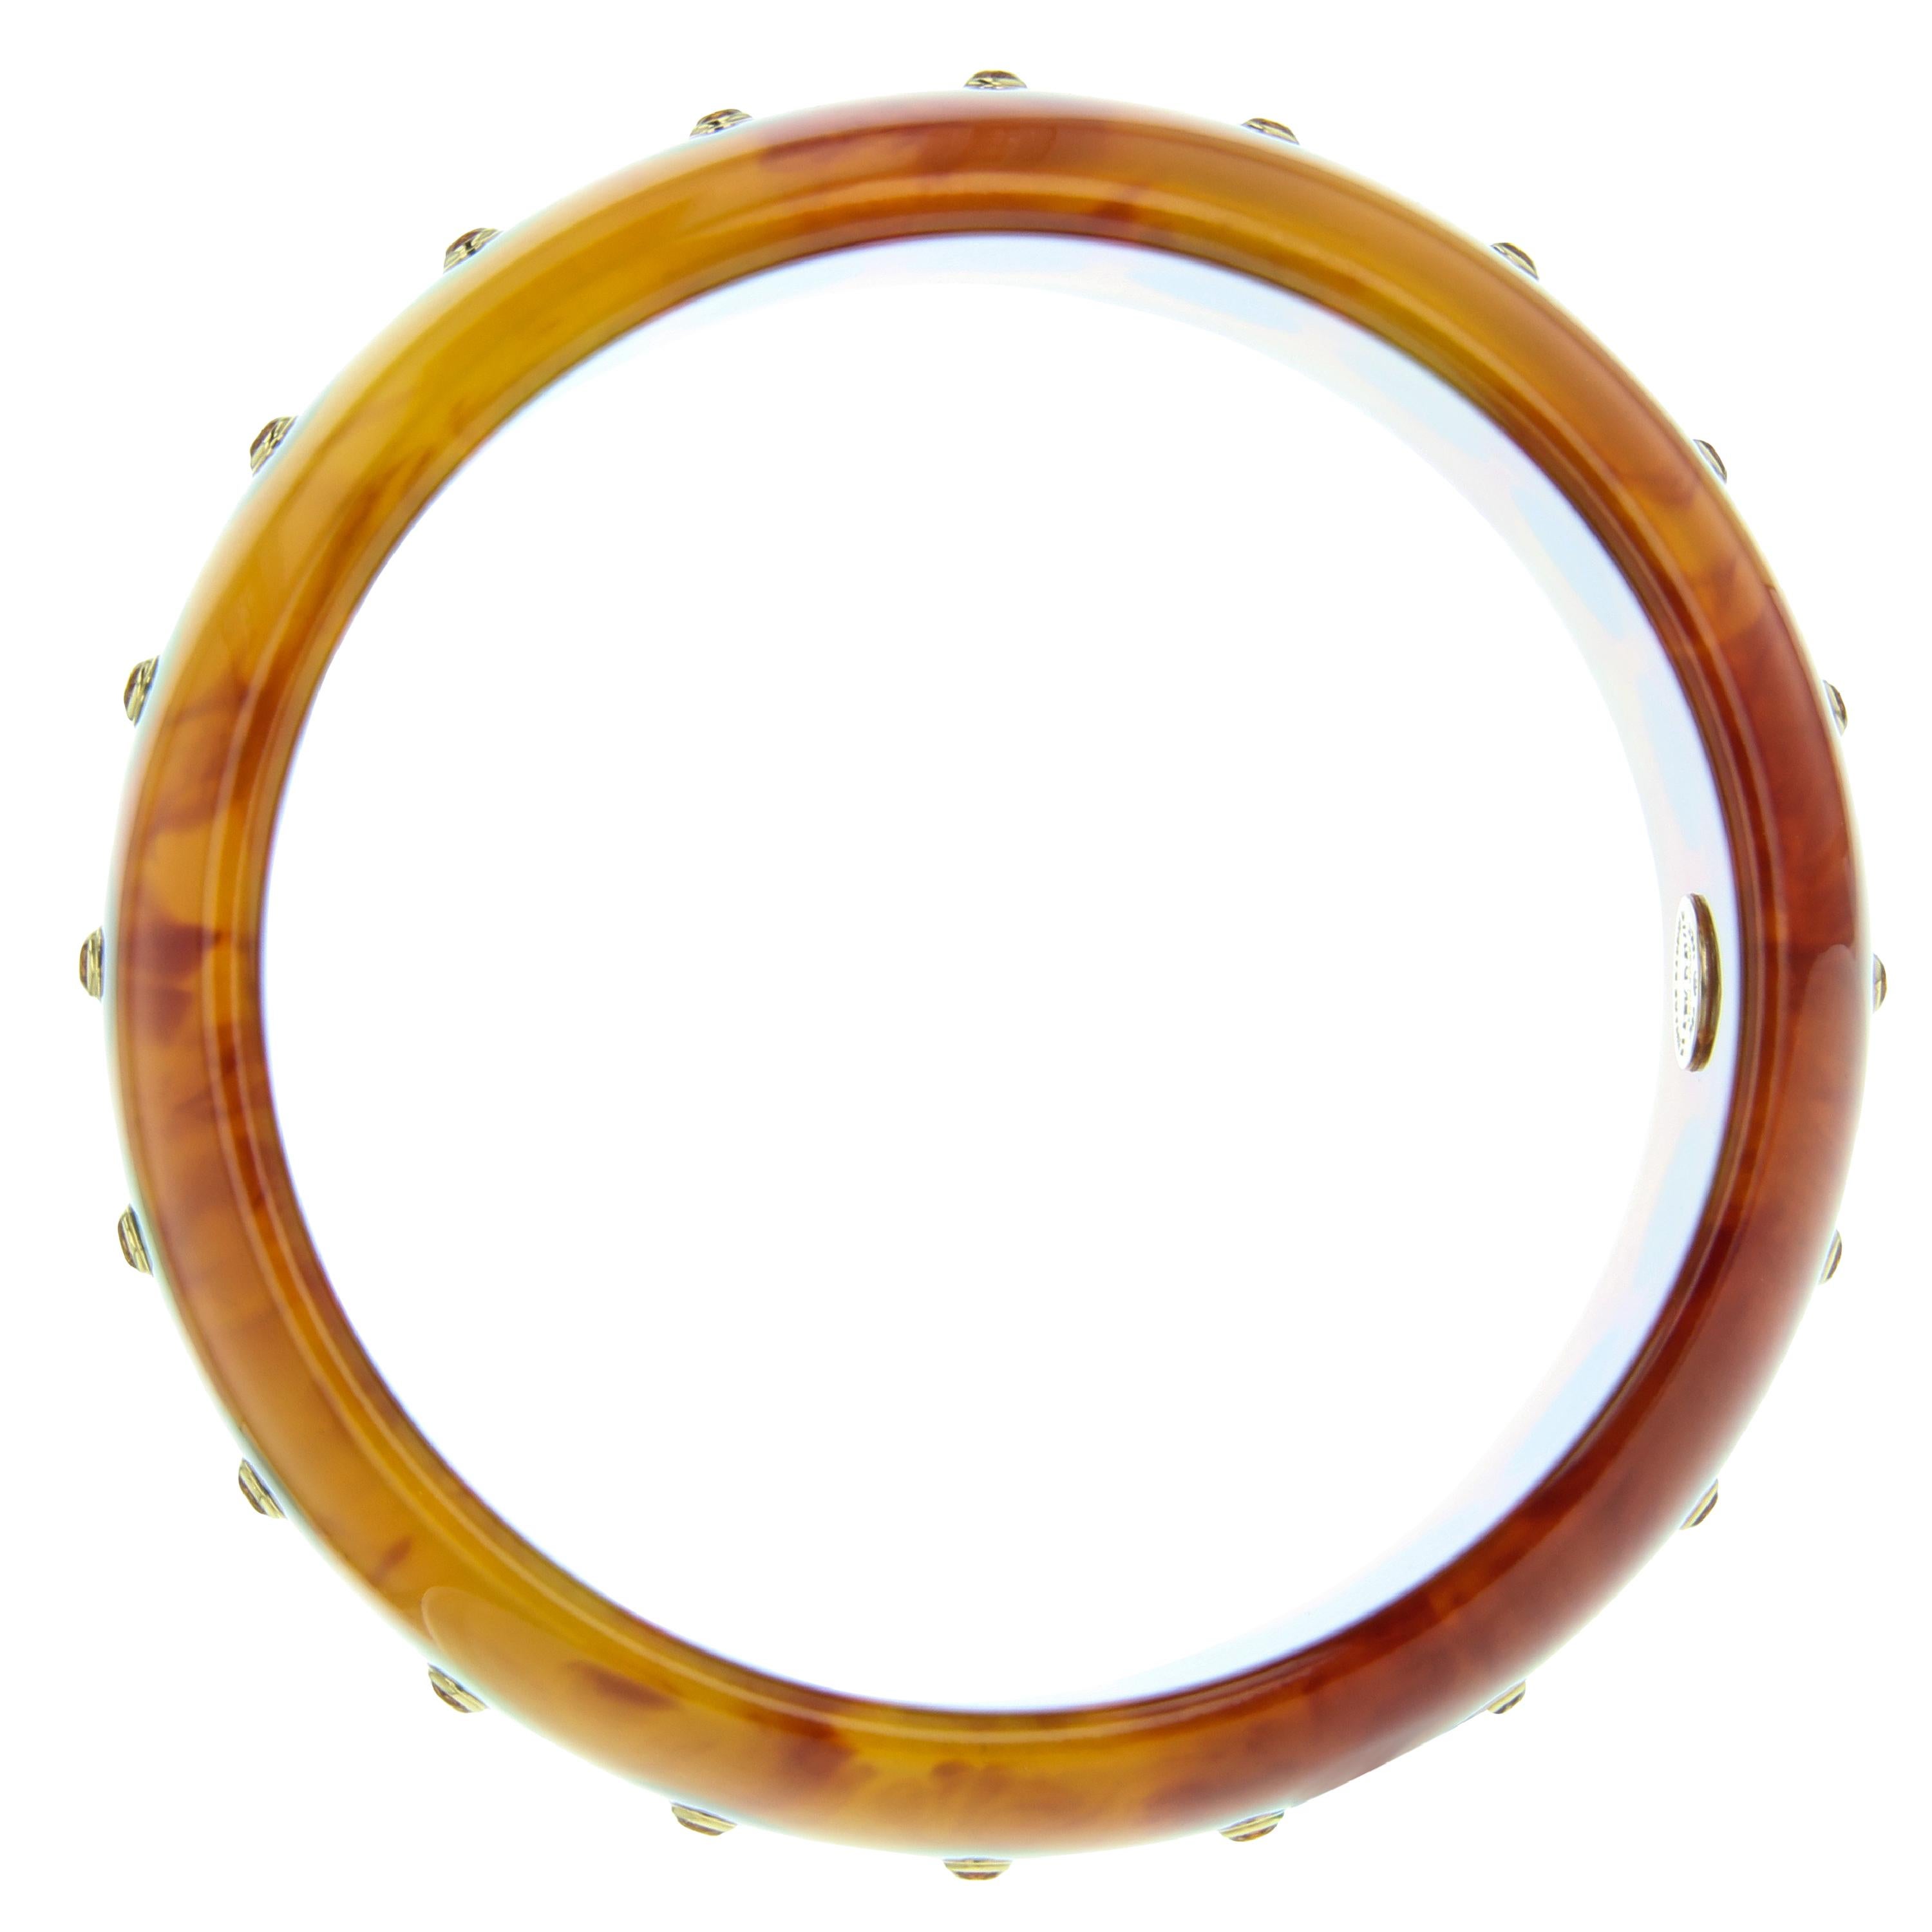 Mark Davis Vintage Tortoiseshell Bakelite Bangle with Polka Dots and Citrine In New Condition For Sale In Beaufort, SC